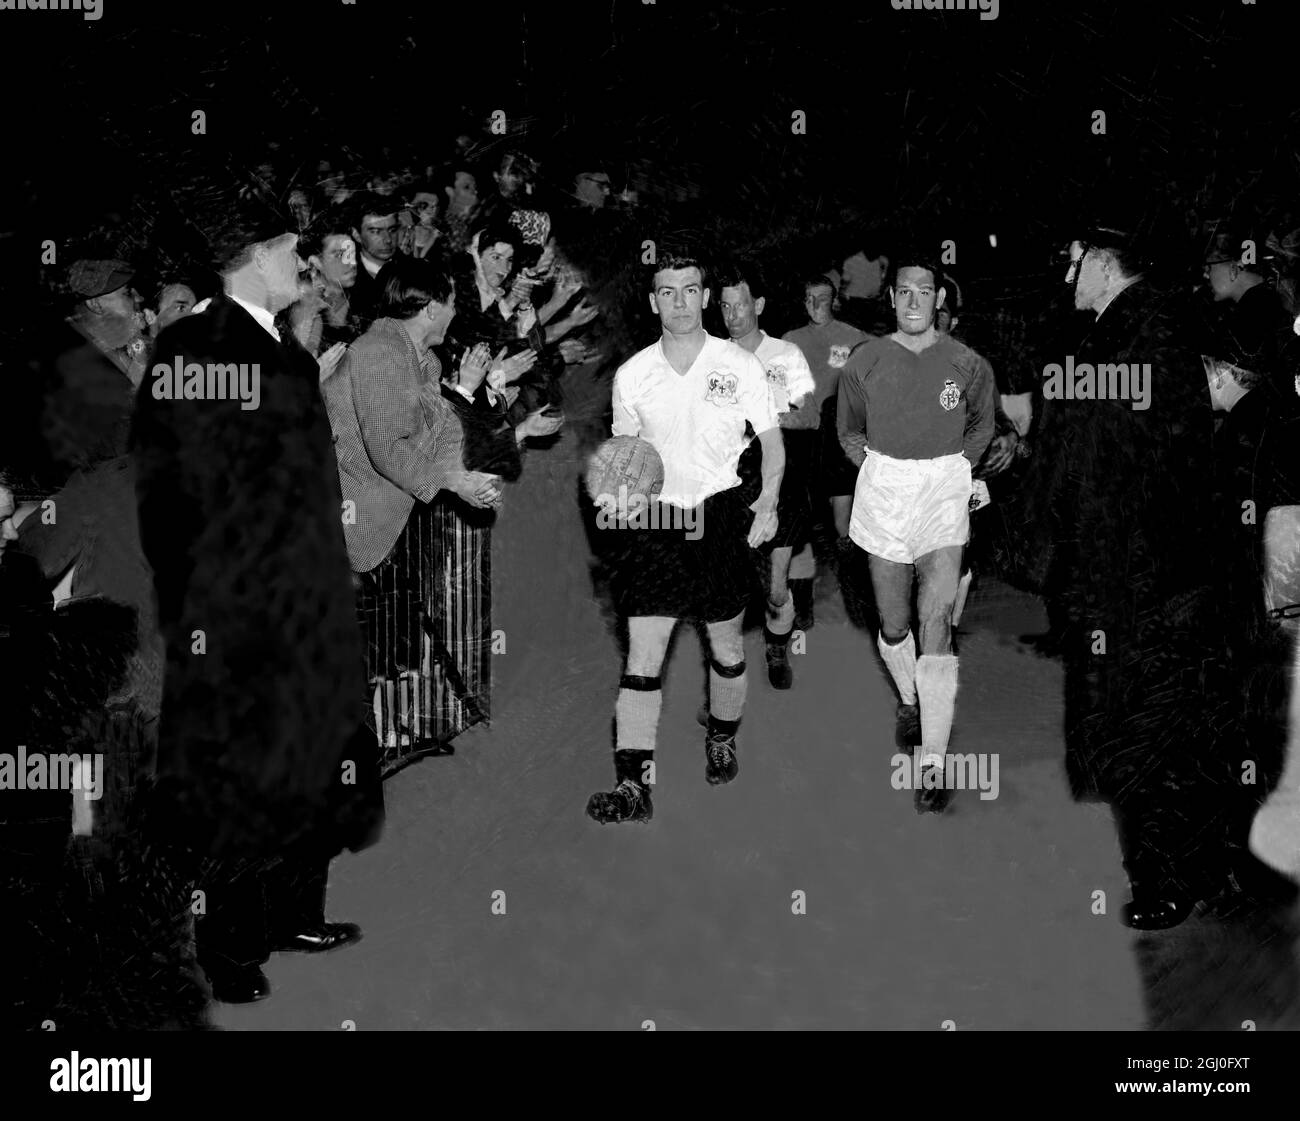 London Select 11 v Barcelona Coming out of the tunnel onto the field at Stamford Bridge Johnny Haynes England and Fulham player holds the ball as he leads the London team. Leading the Barcelona team is Ribelles. 5th March 1958 Stock Photo